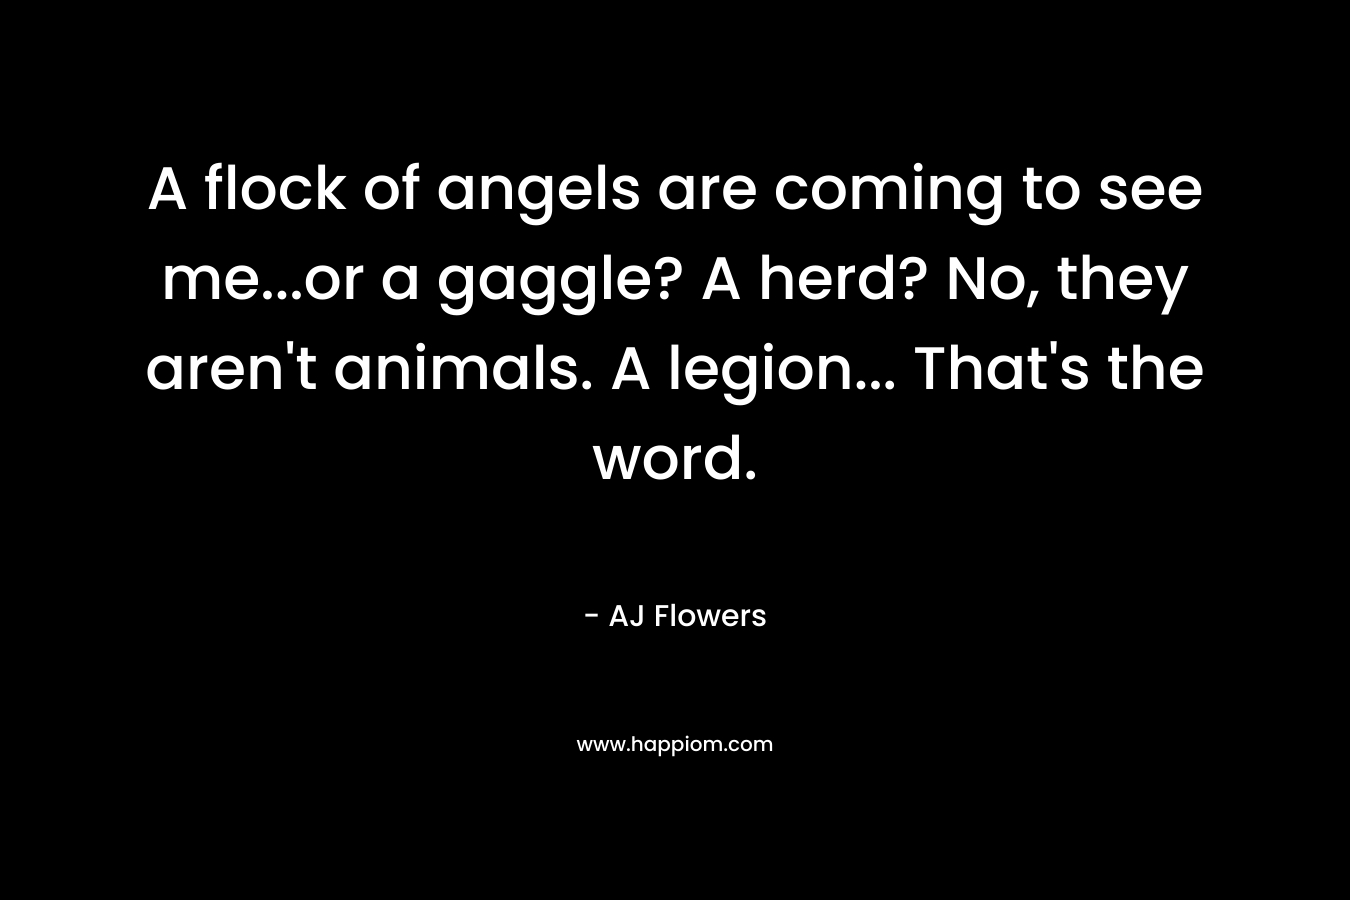 A flock of angels are coming to see me…or a gaggle? A herd? No, they aren’t animals. A legion… That’s the word. – AJ Flowers